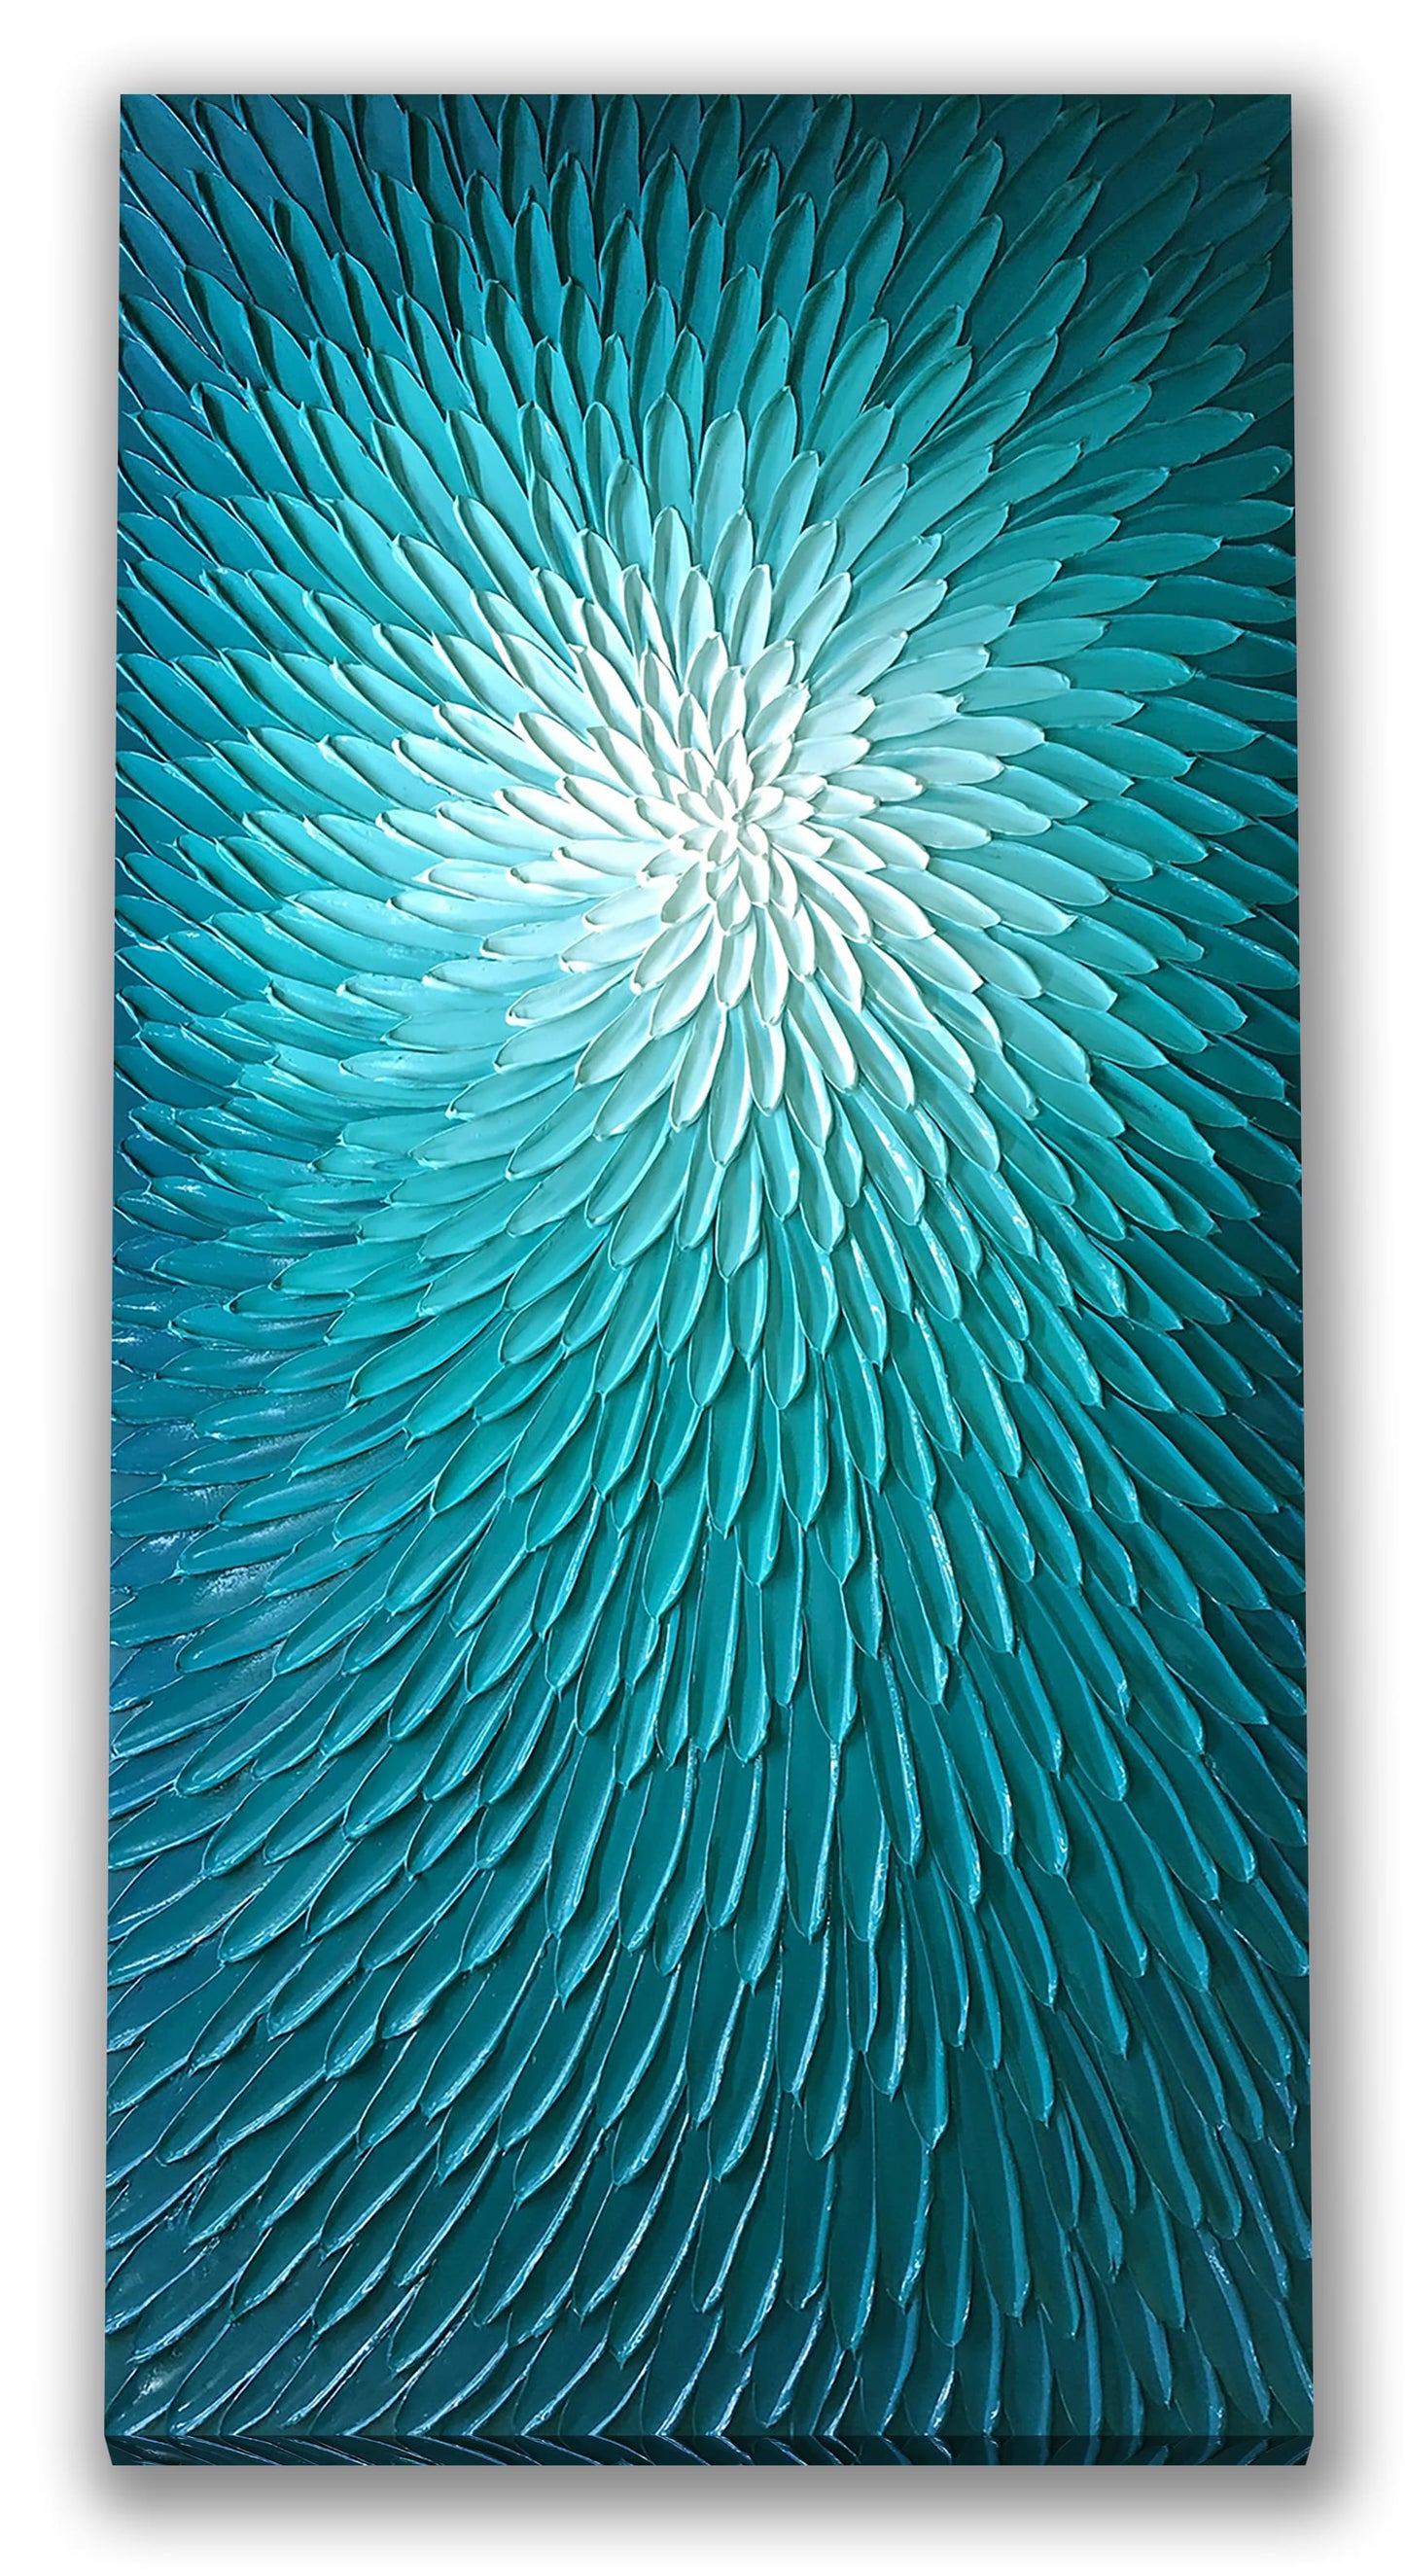 "Aquatic Bloom" hand-painted on wrapped canvas, wall art for Home decor